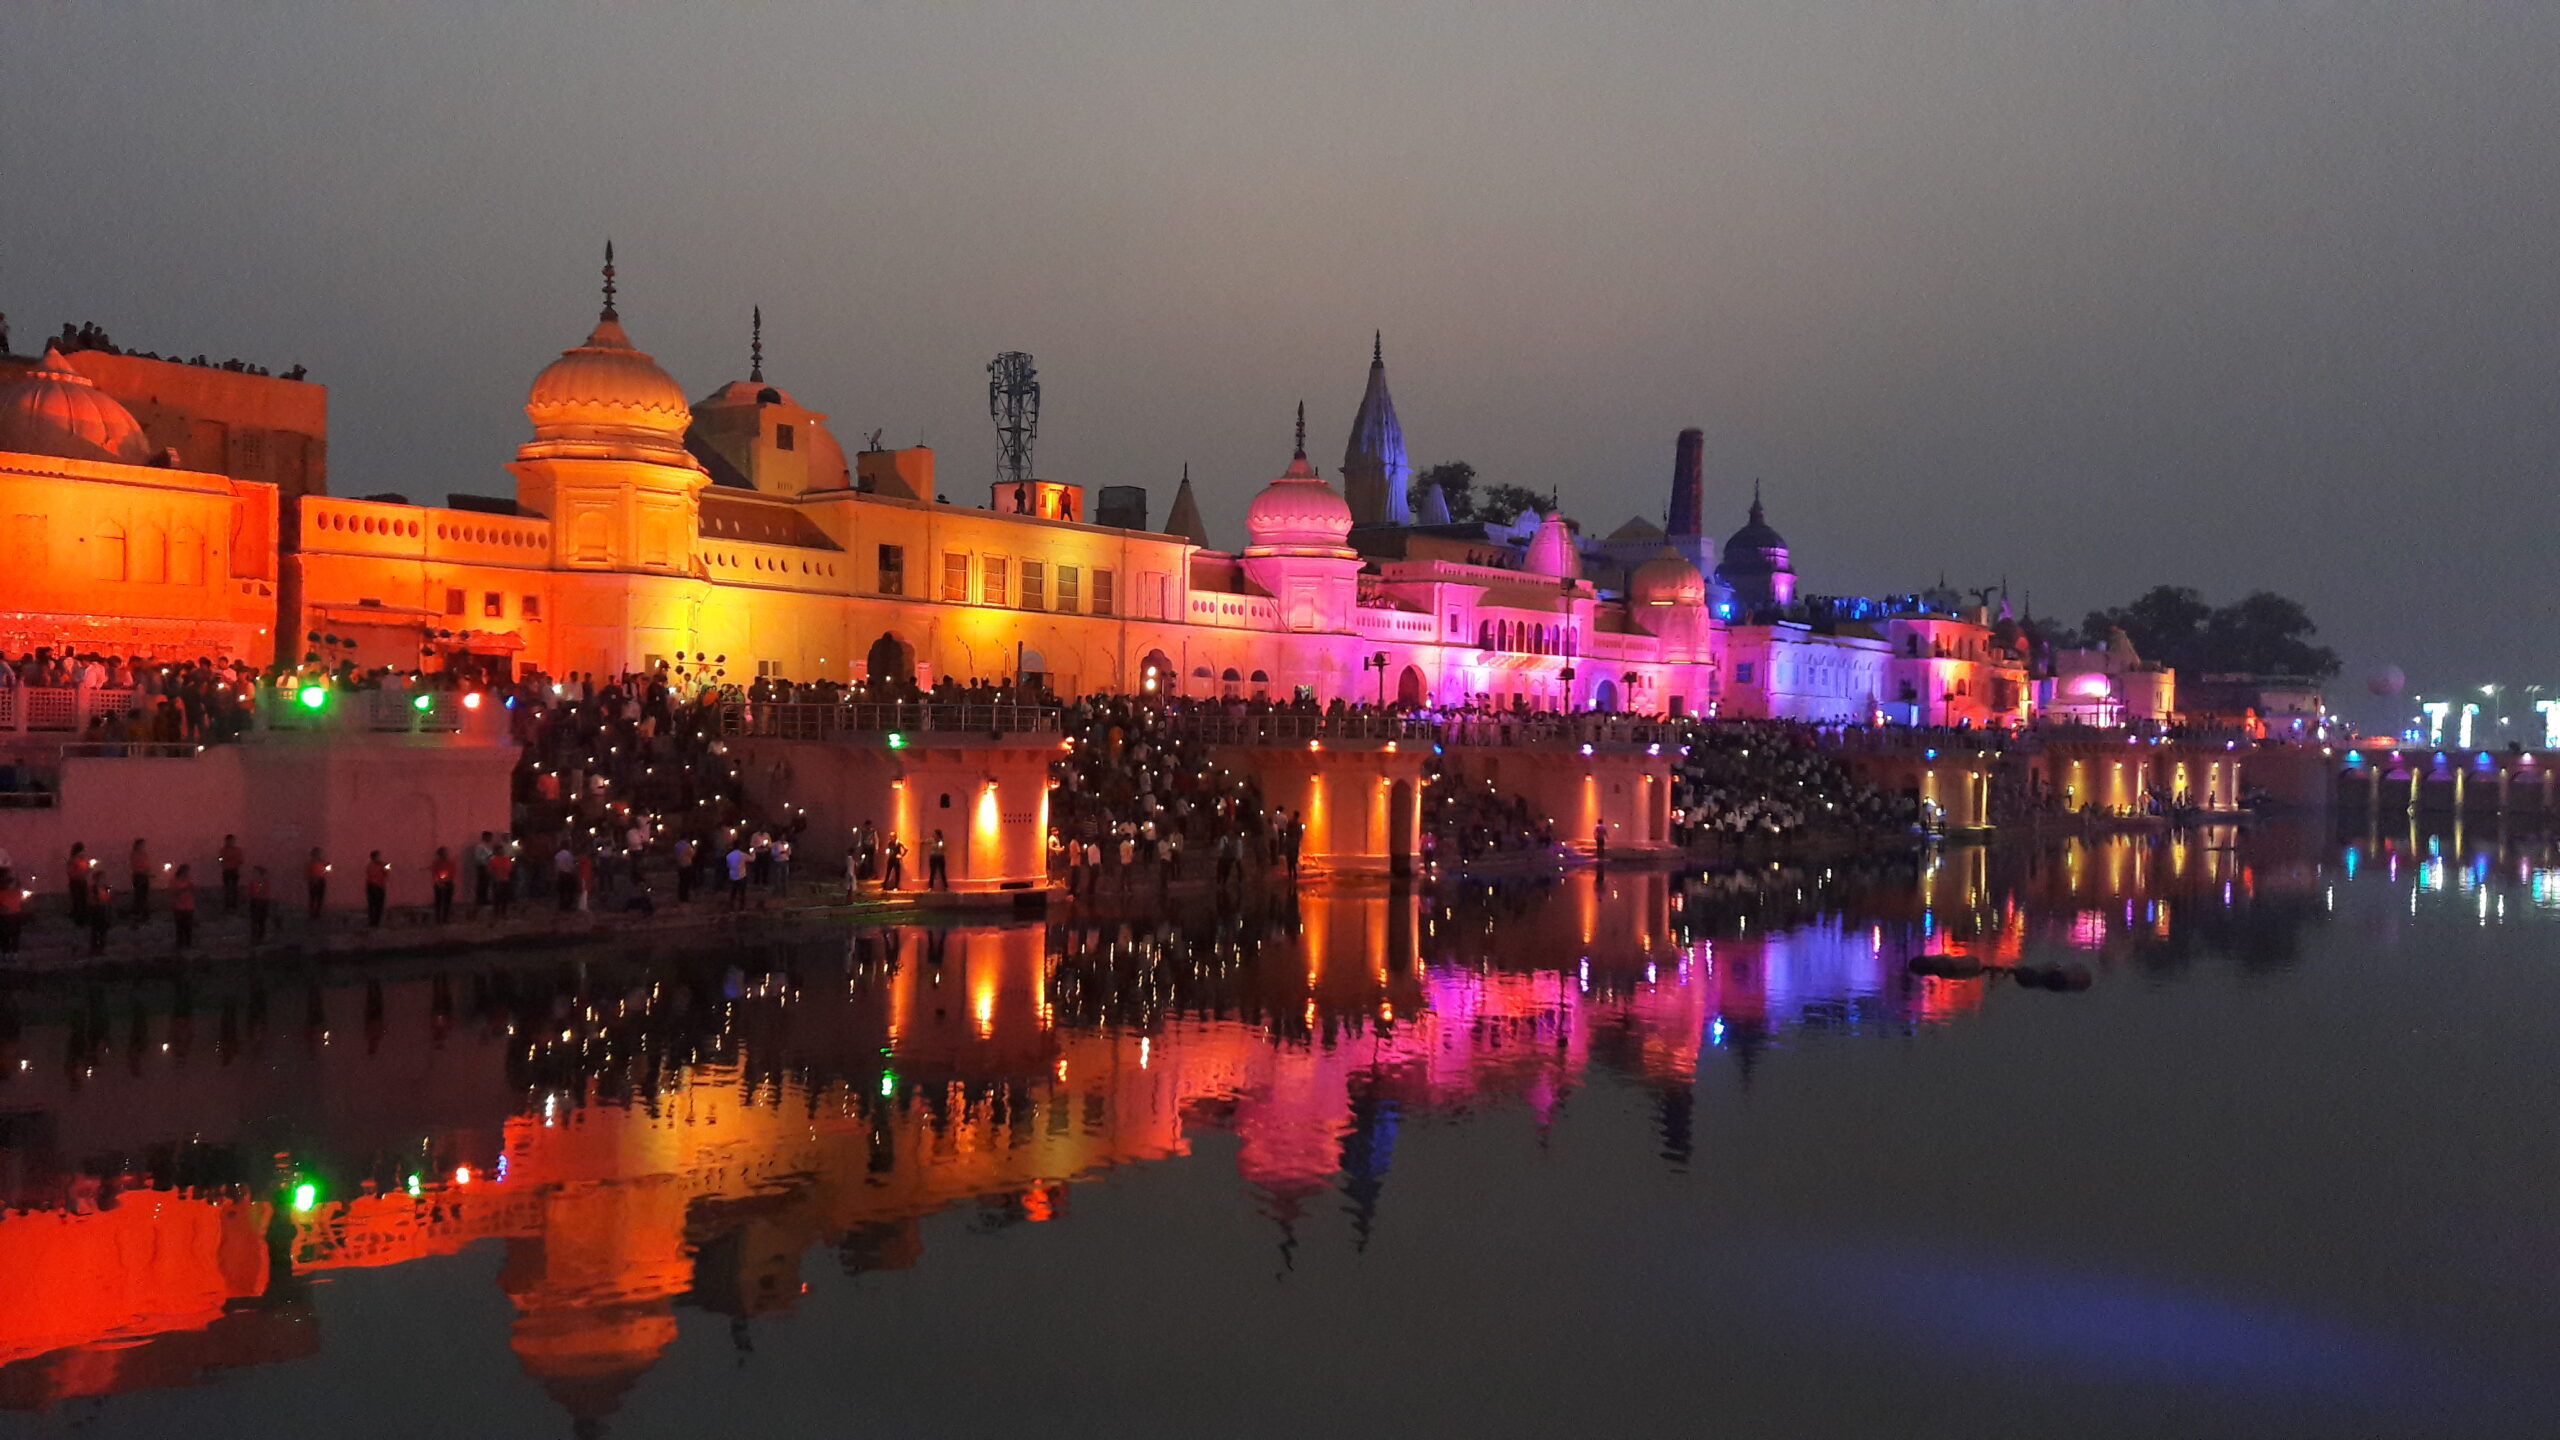 Ayodhya prepares for 3-fold increase in tourist arrivals by 2030